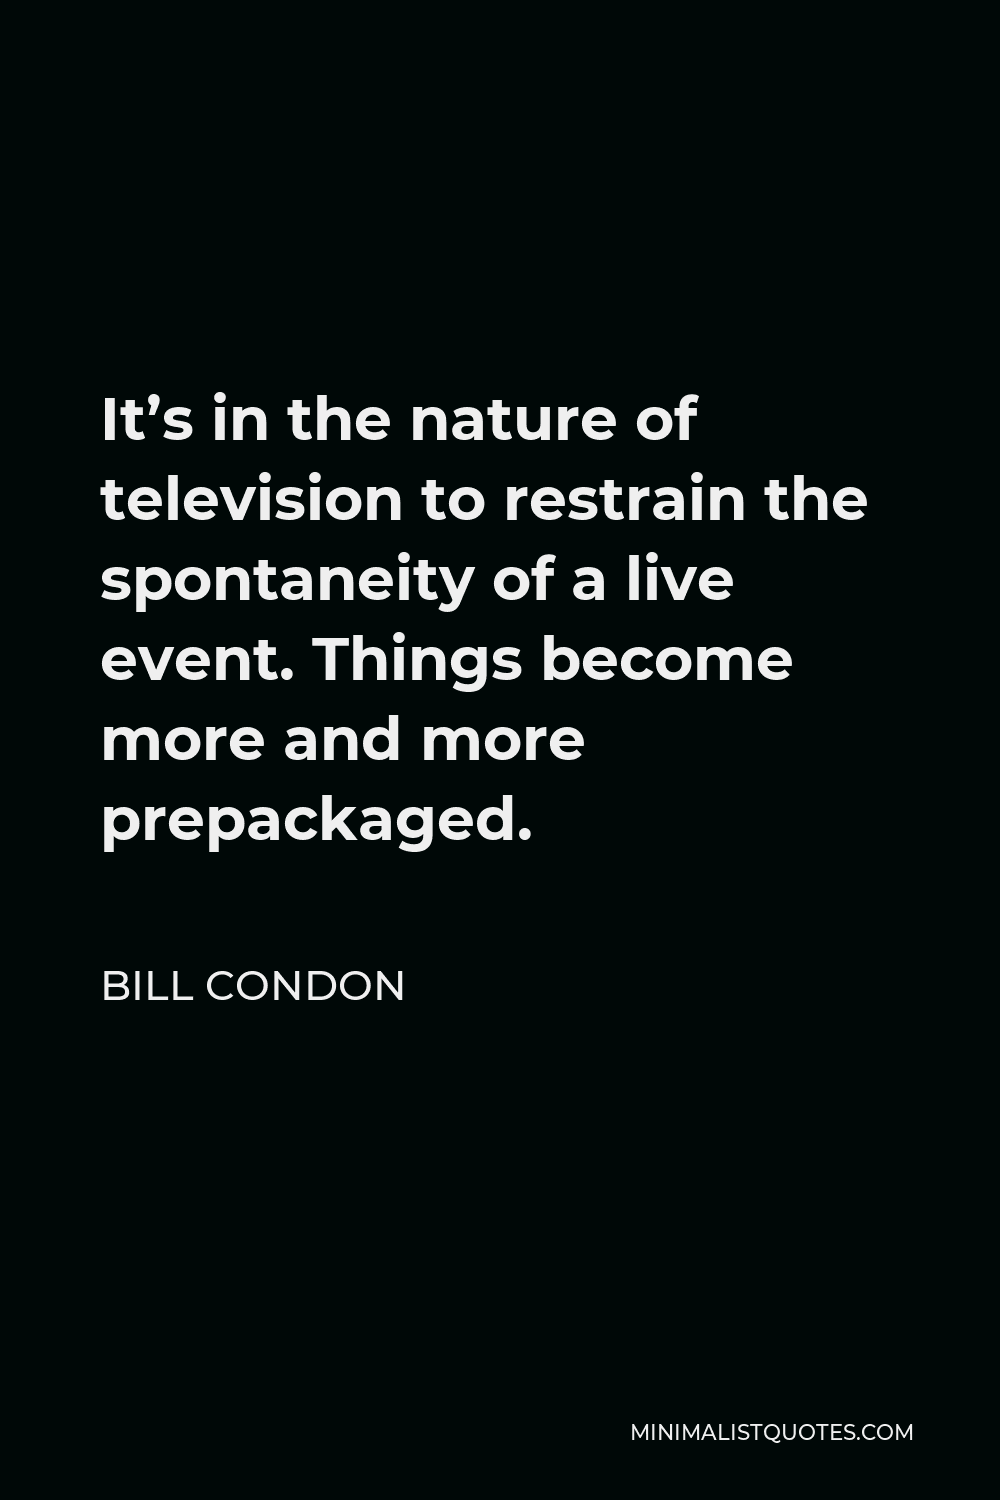 Bill Condon Quote - It’s in the nature of television to restrain the spontaneity of a live event. Things become more and more prepackaged.